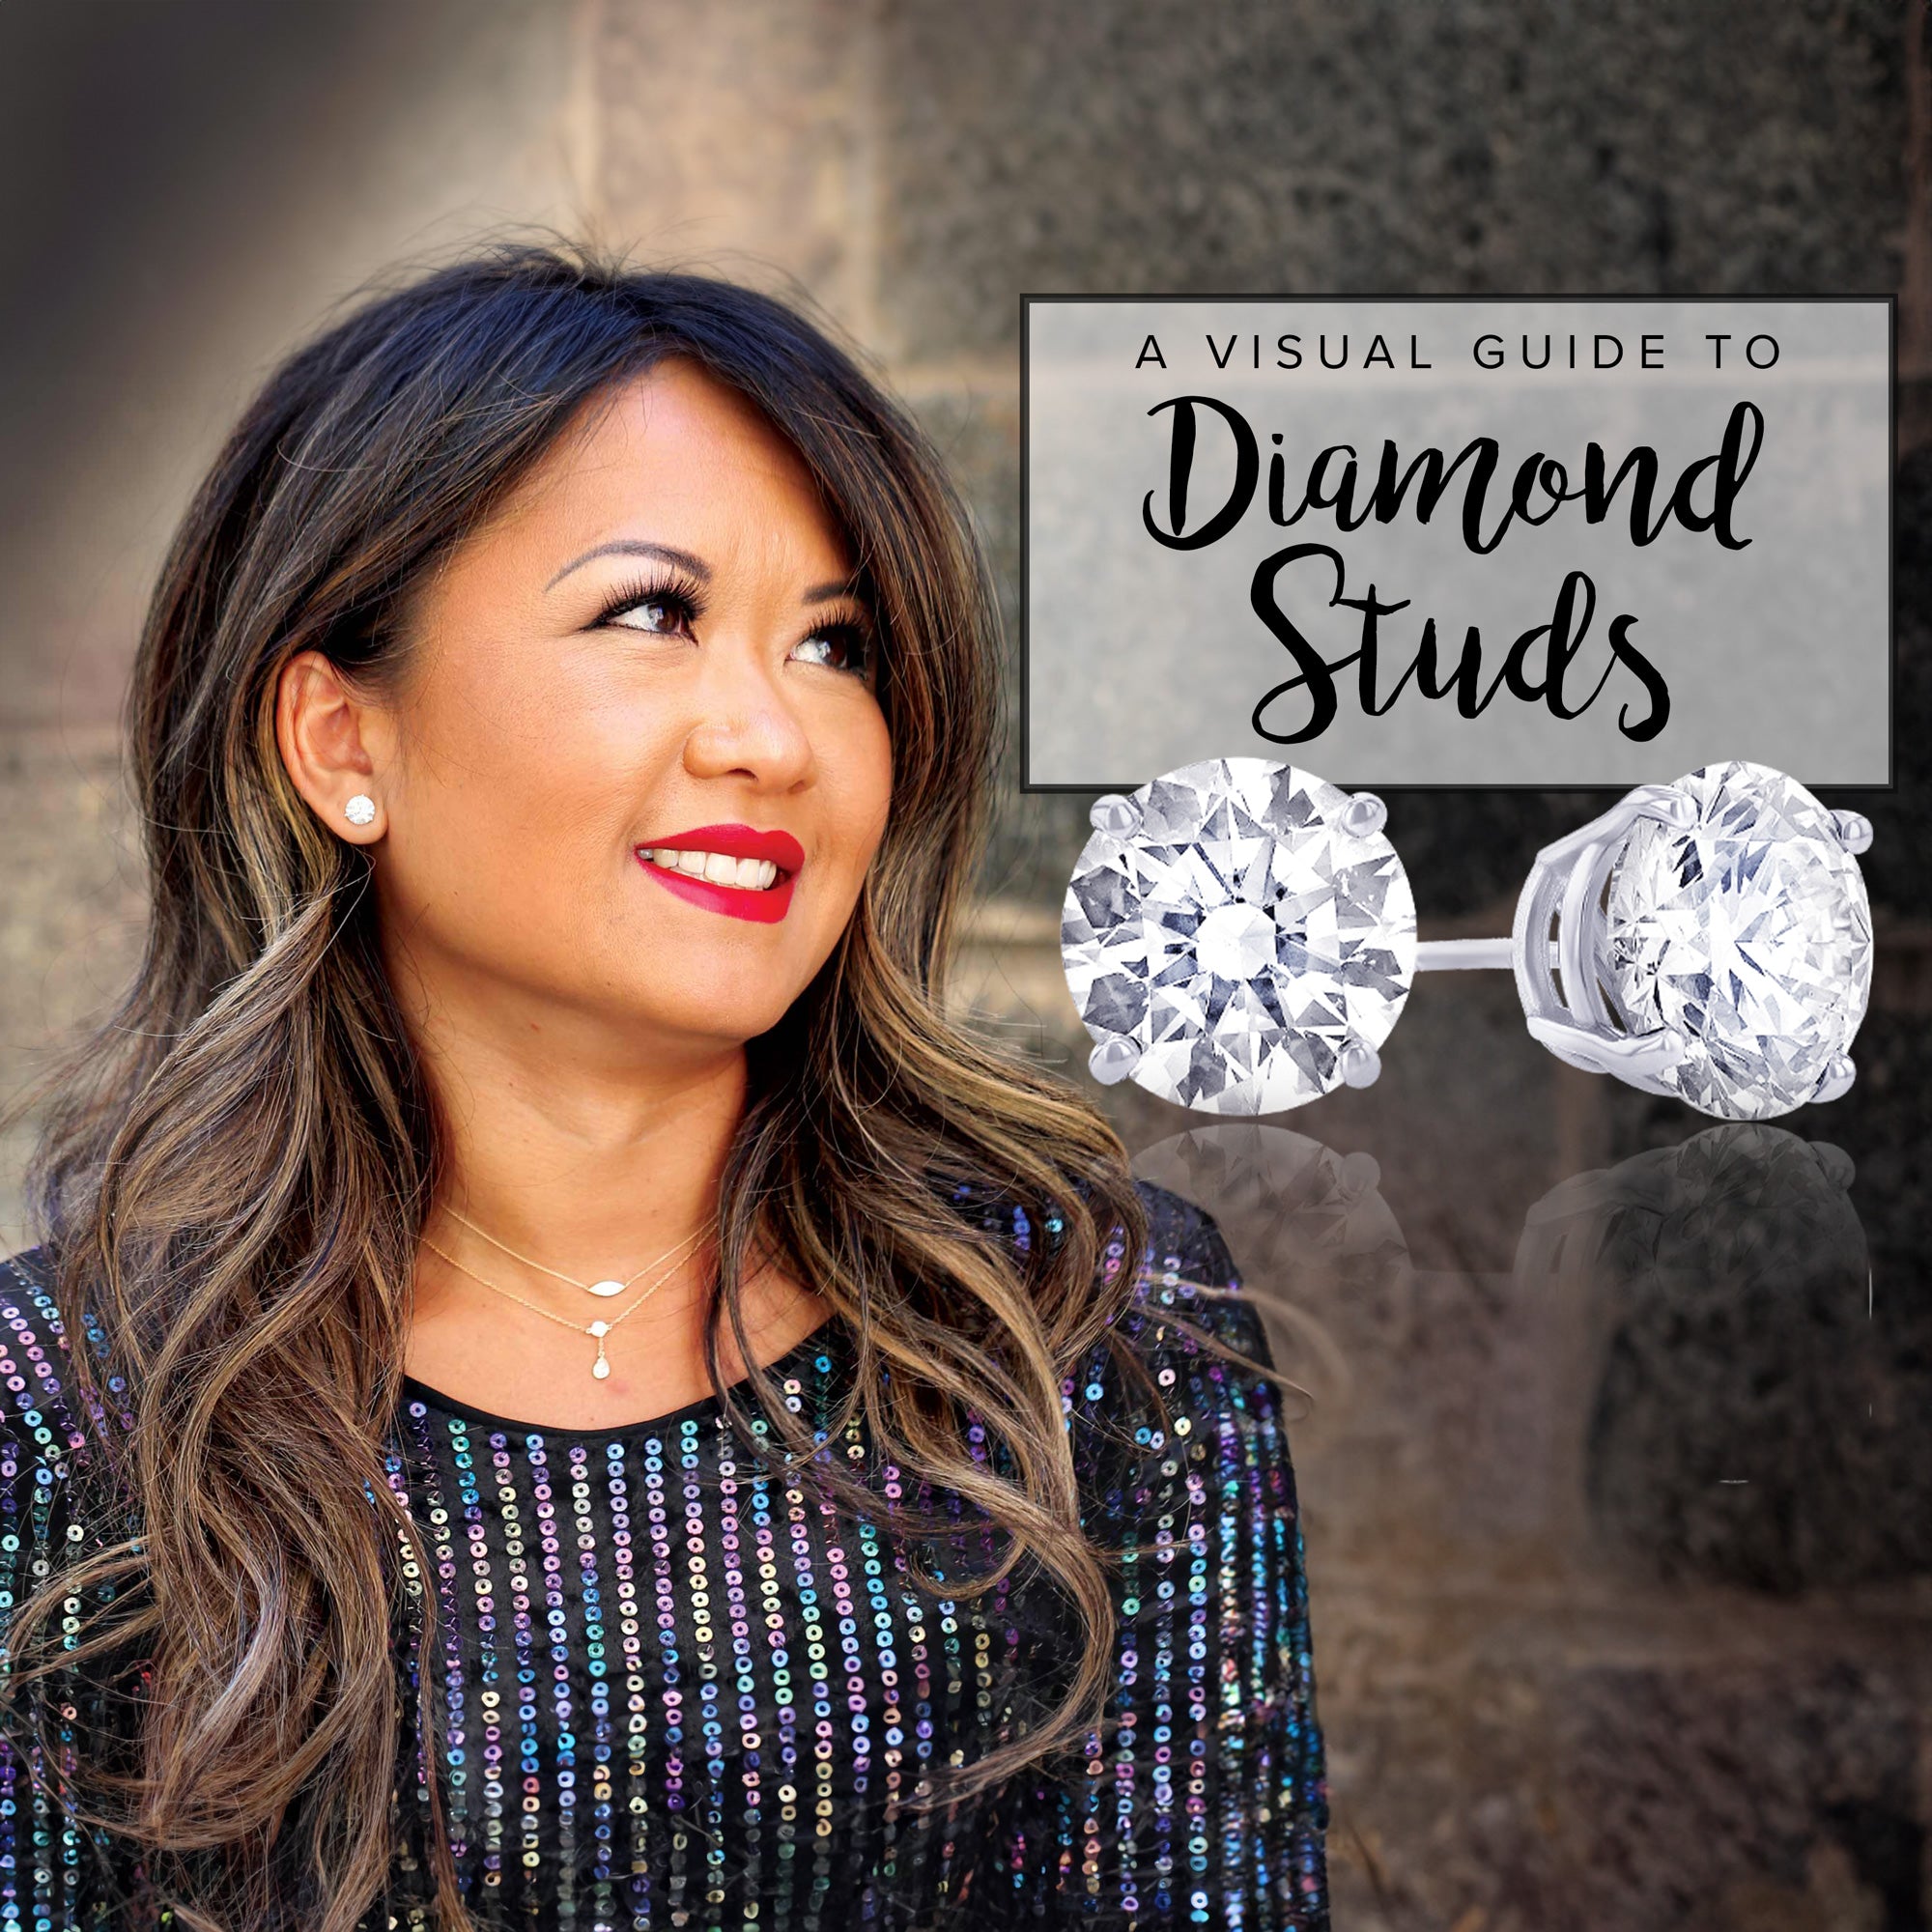 Two 1 carat diamond studs next to a dime to show size comparison.